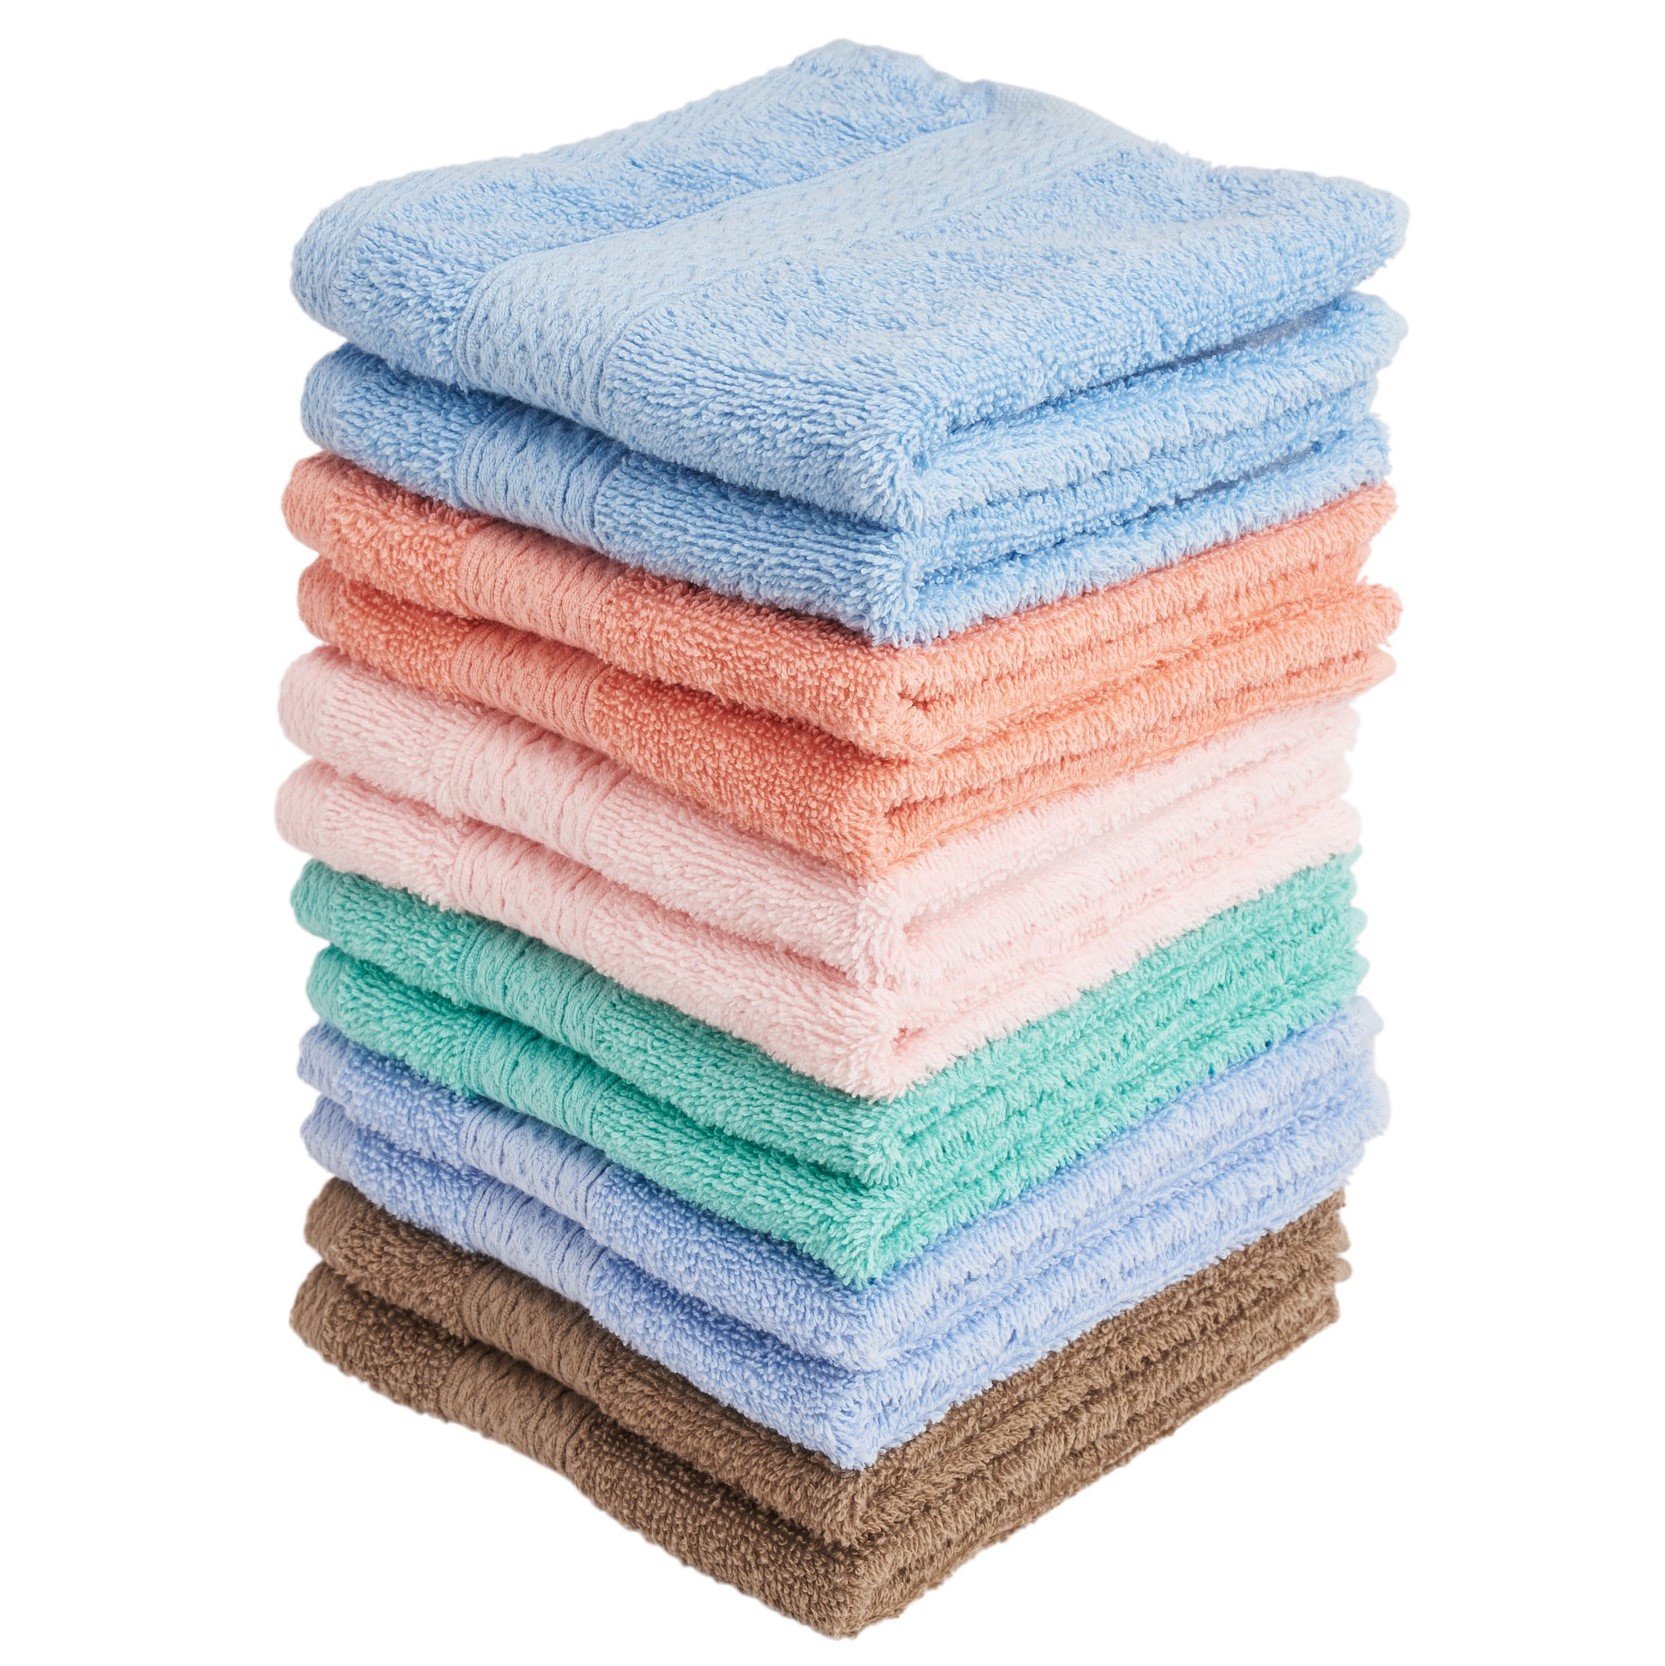 Luxurious Washcloths Set Of 12 Size 13” X 13” Thick Loop Pile Washcloth Absorbent And